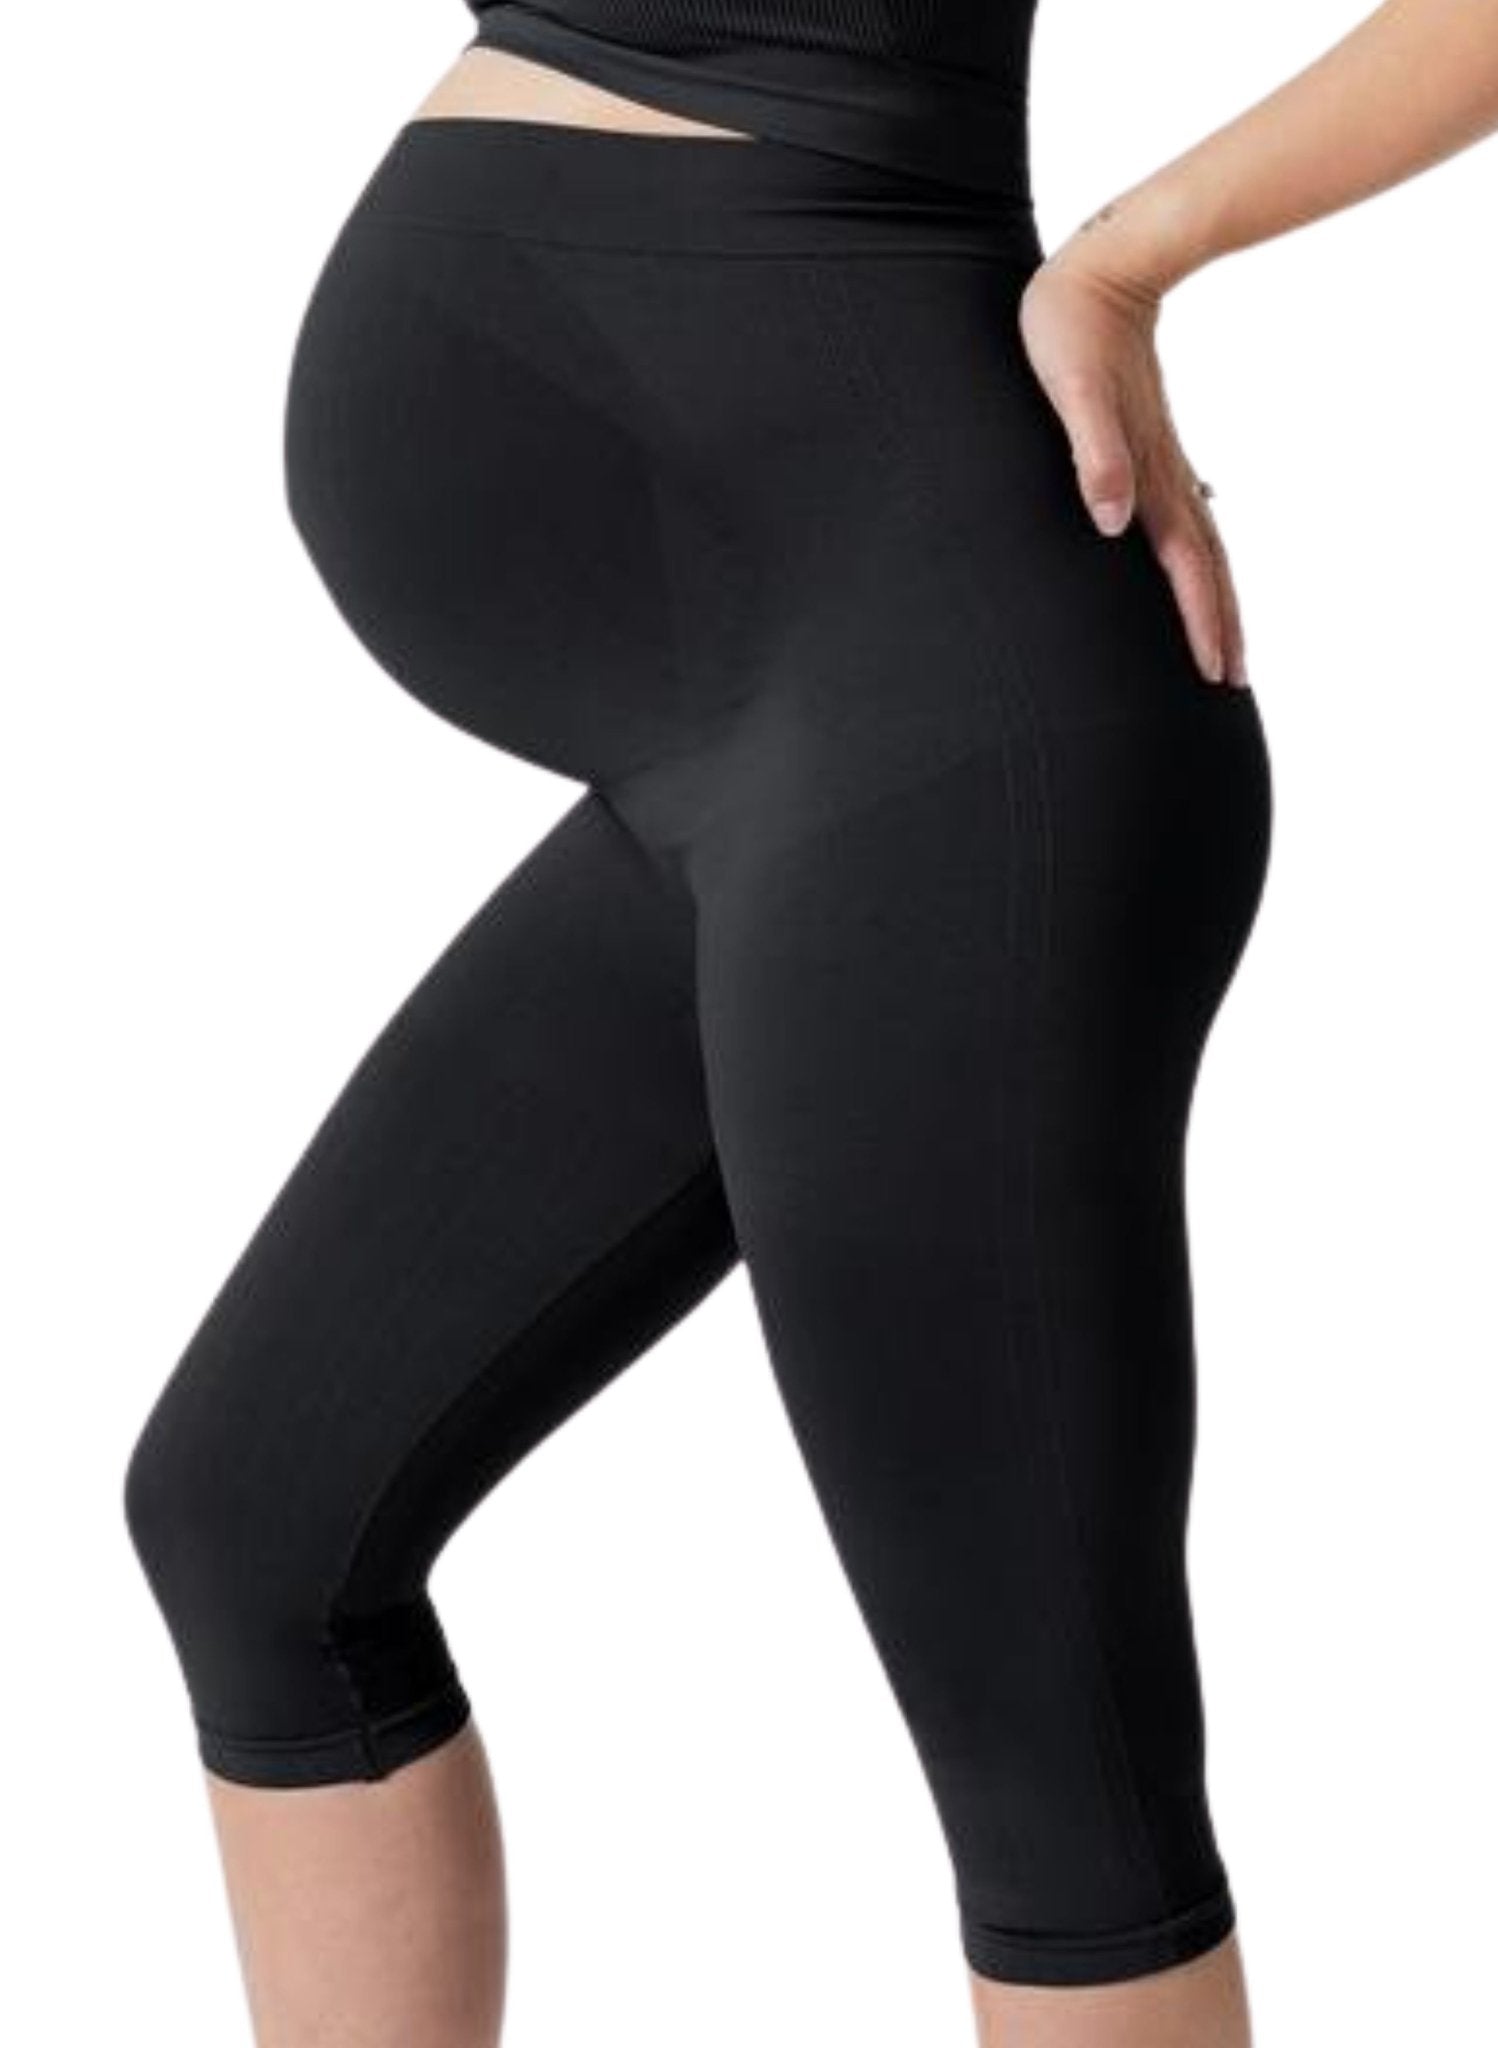 Maternity Belly Support Crop Legging - Black - Mums and Bumps